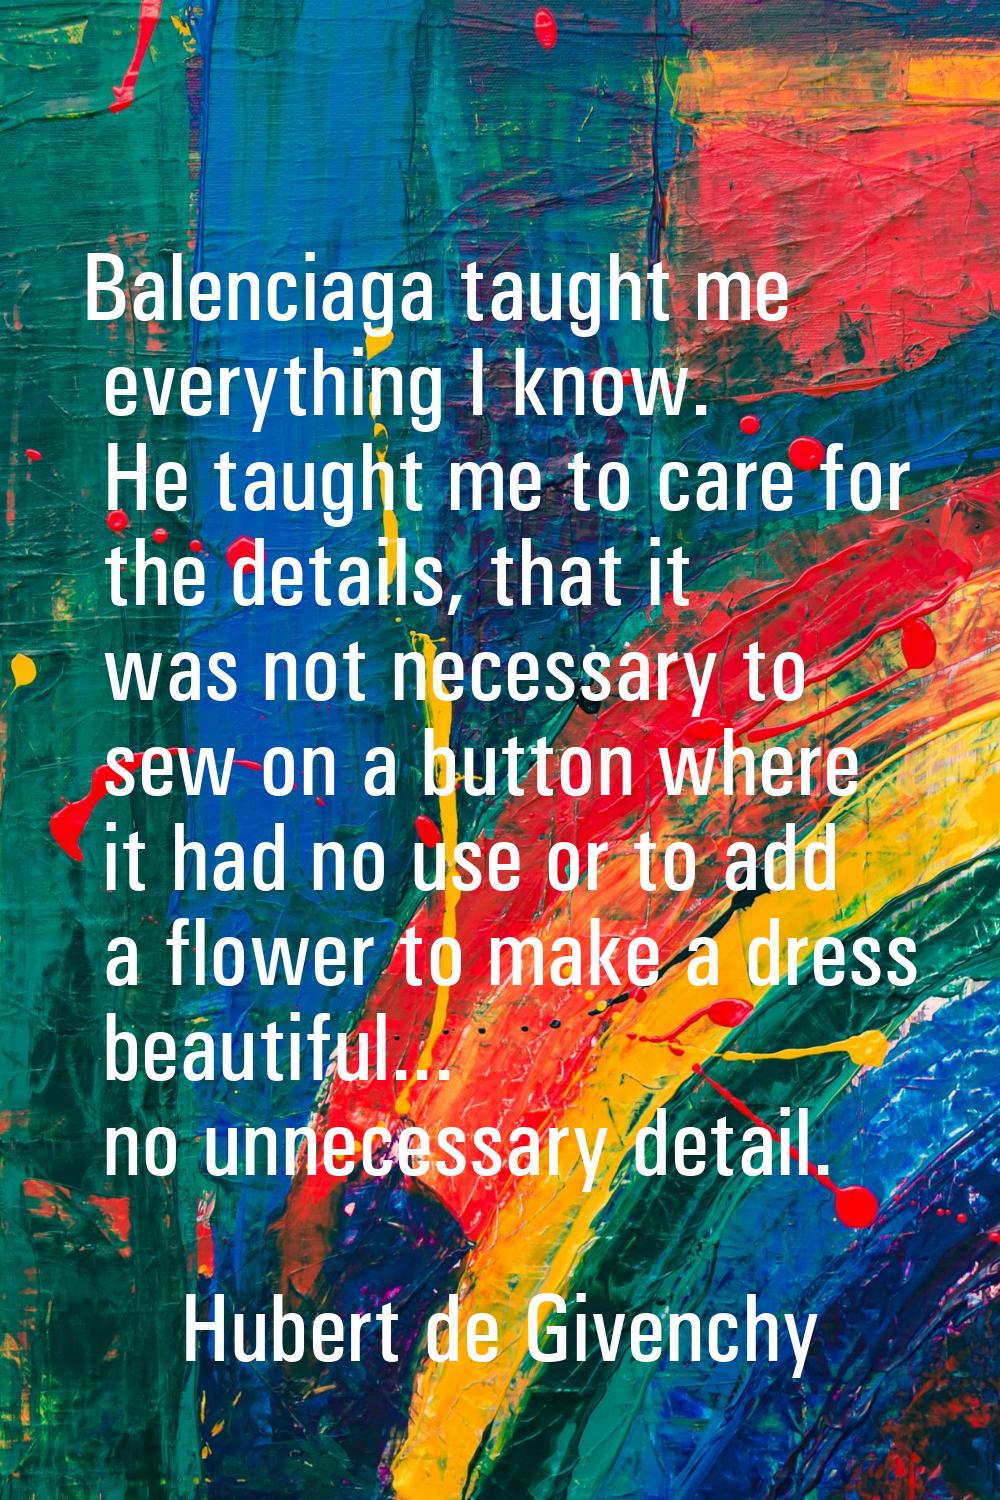 Balenciaga taught me everything I know. He taught me to care for the details, that it was not neces